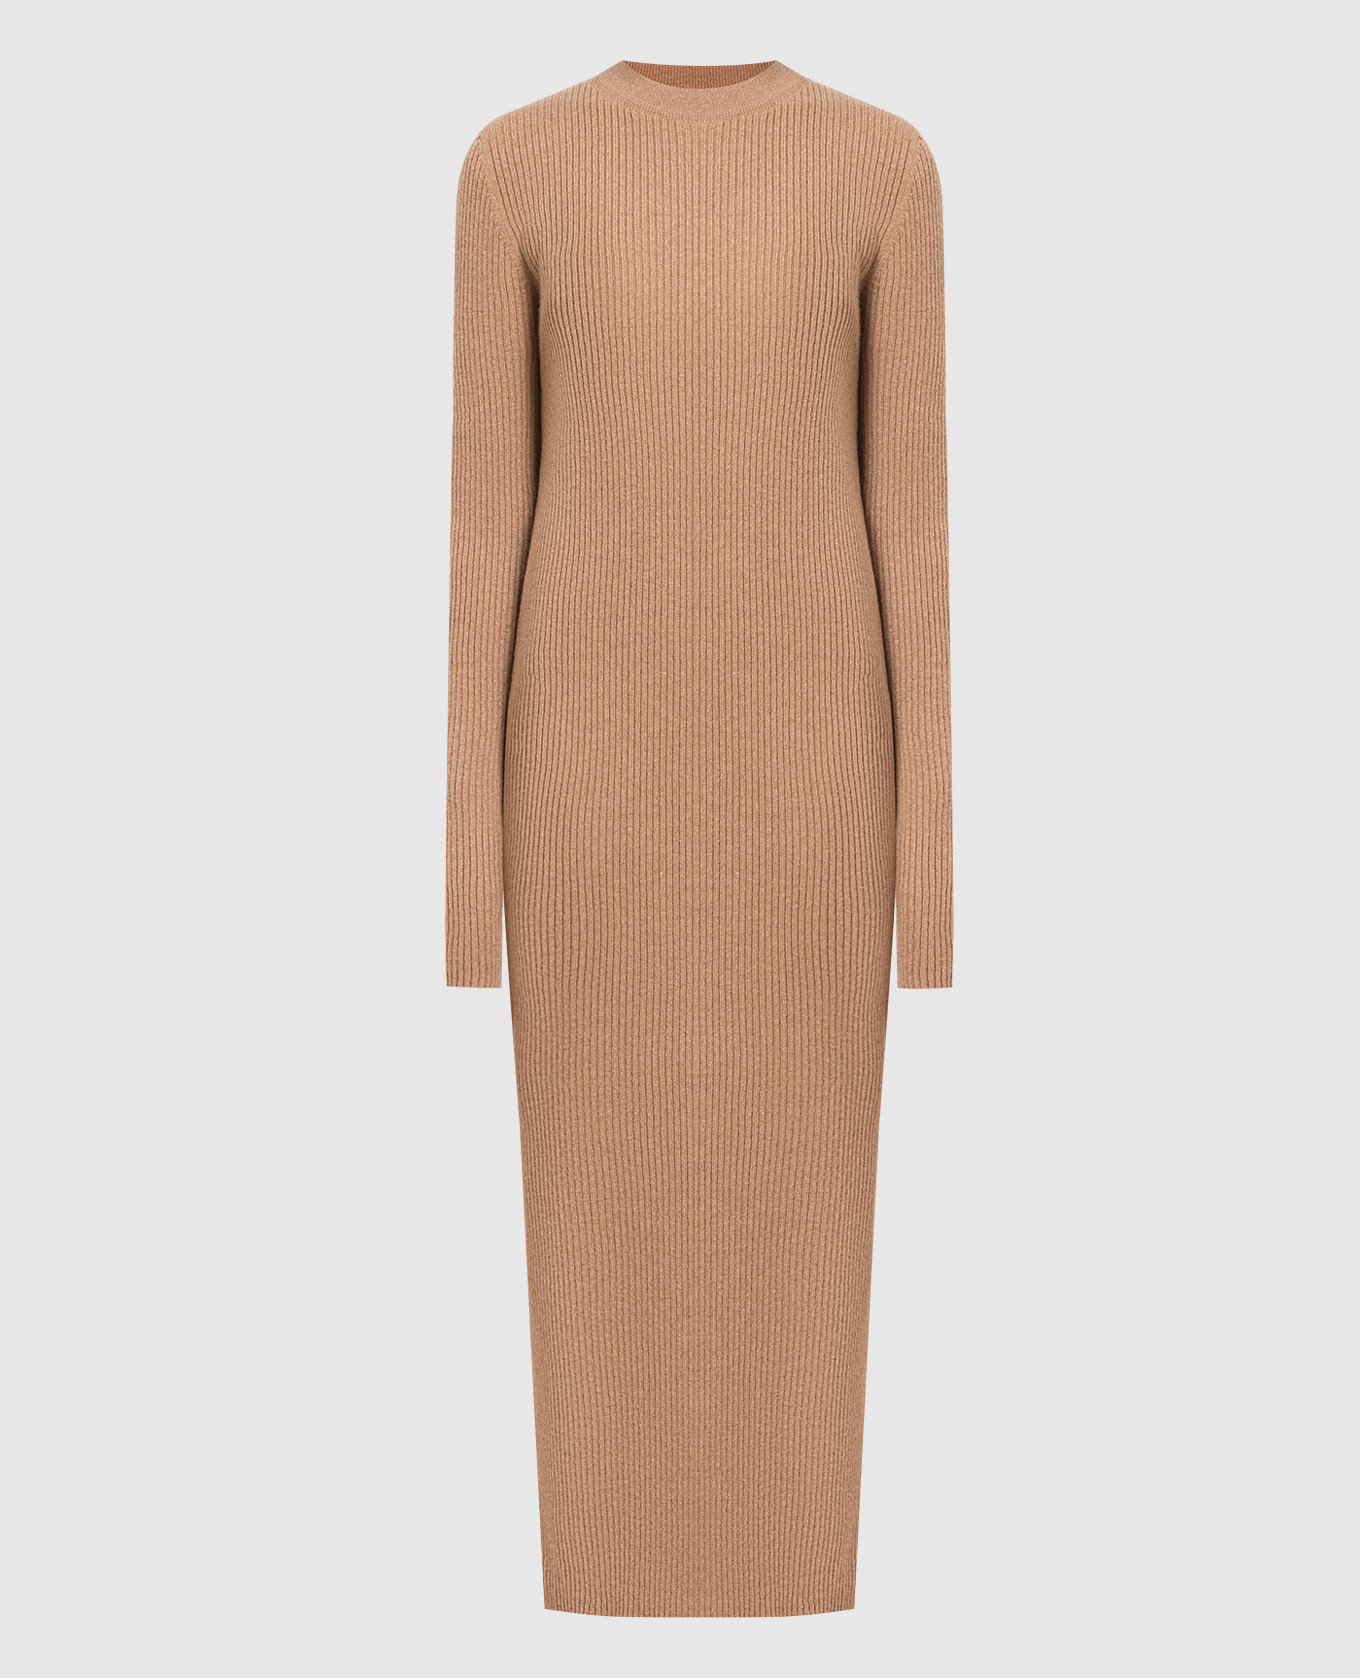 Brown cashmere dress with a scar